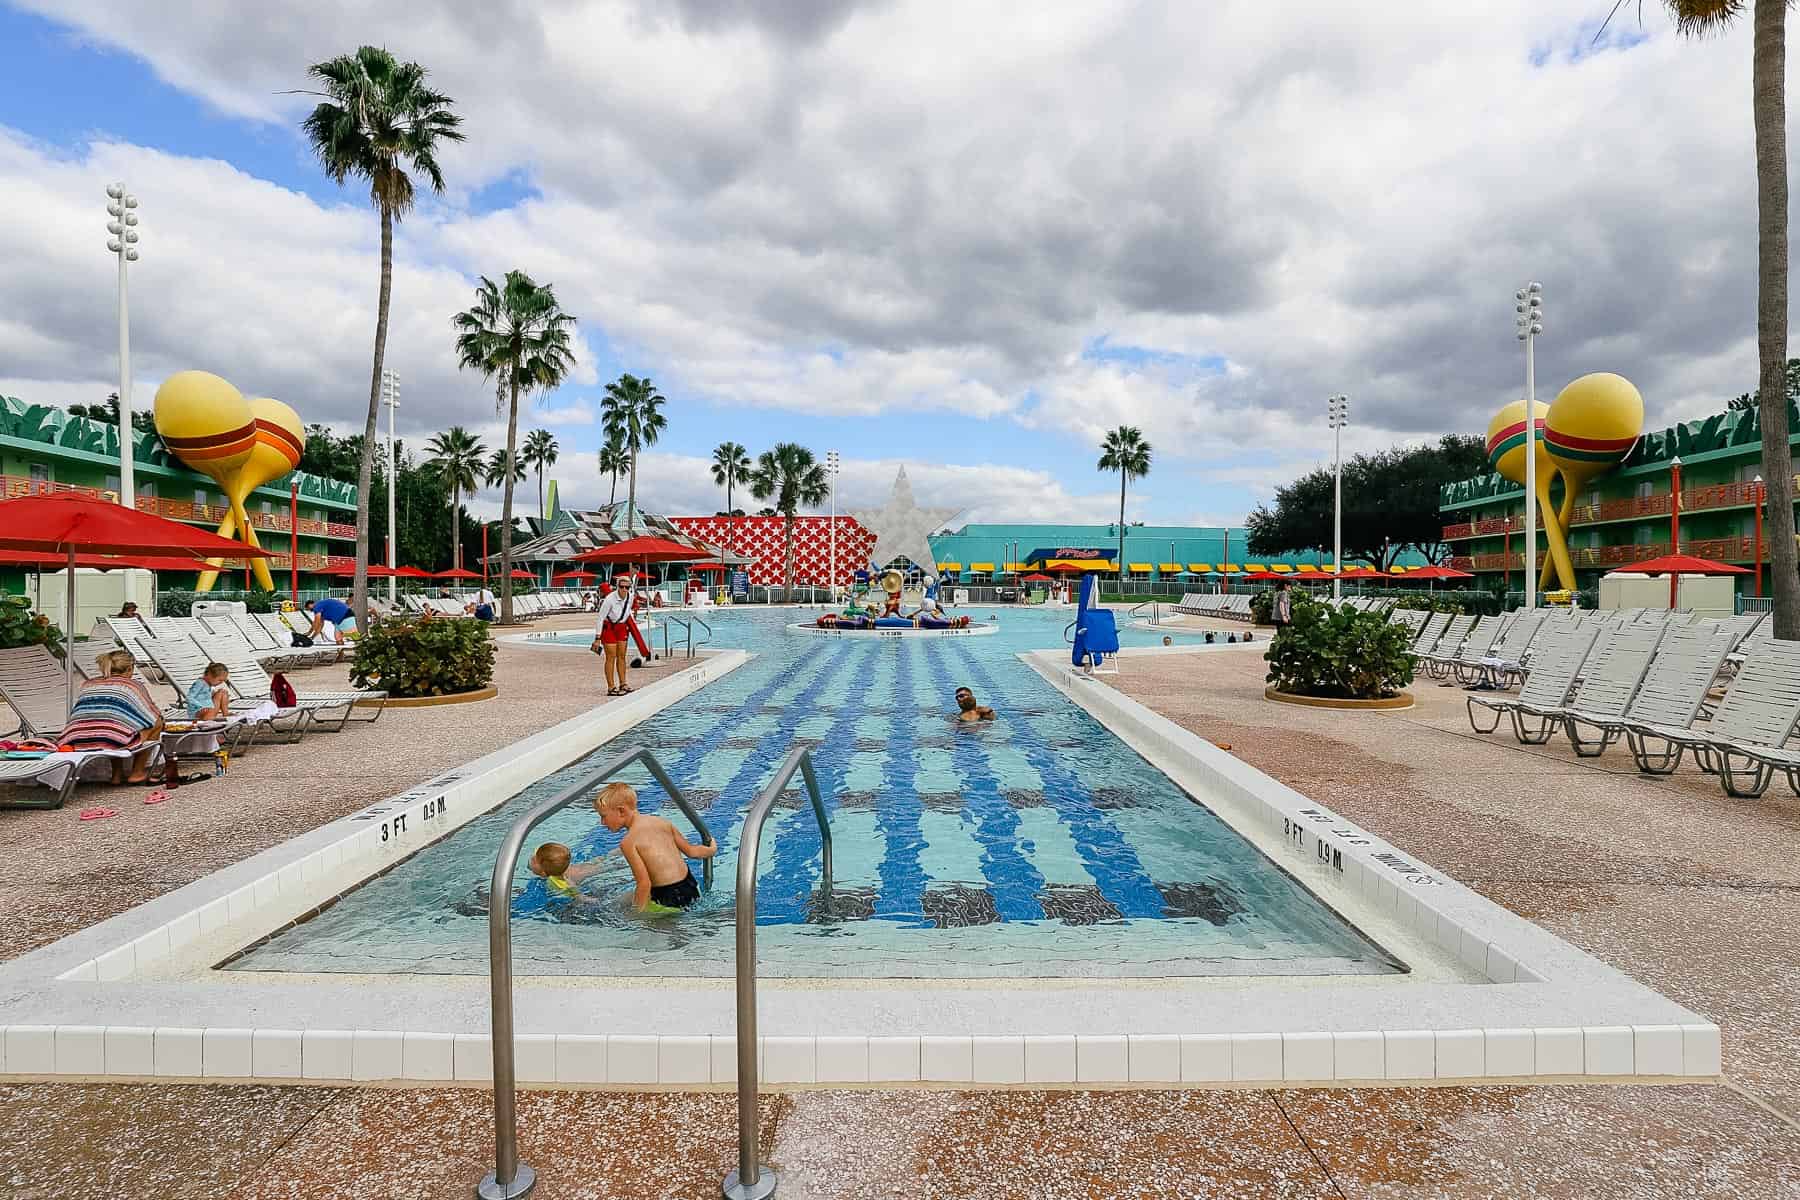 The Calypso Pool holds over 250,000 gallons of water! 